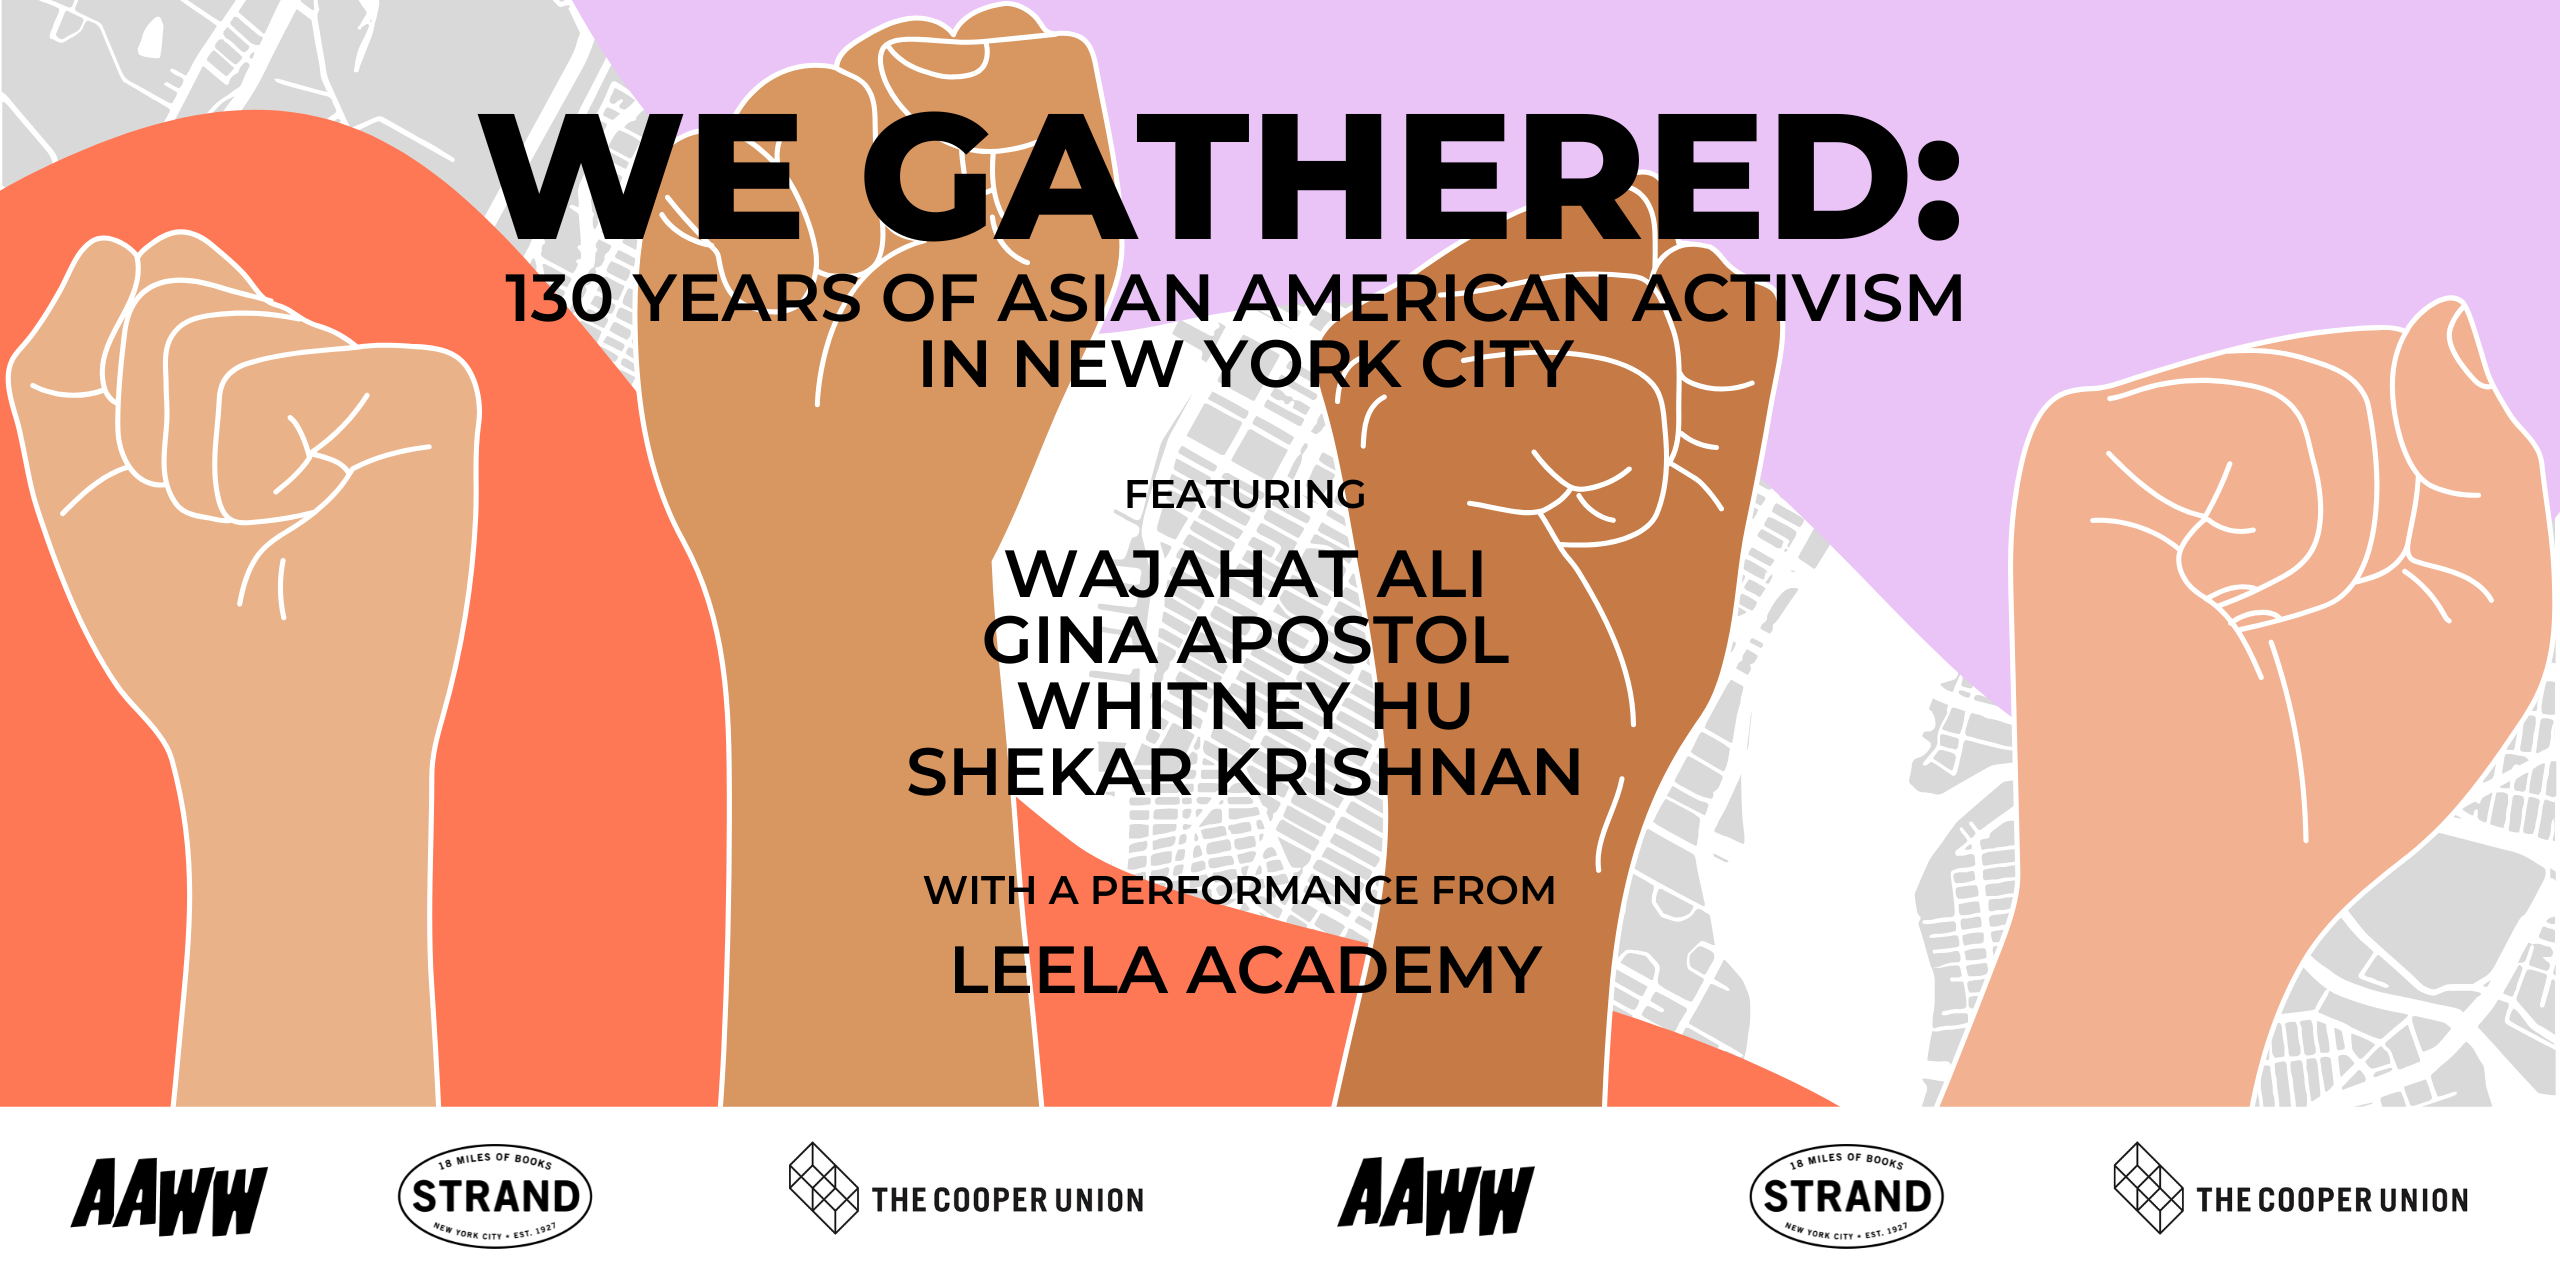 [LIVE] We Gathered: 130 Years of Asian American Activism in New York City